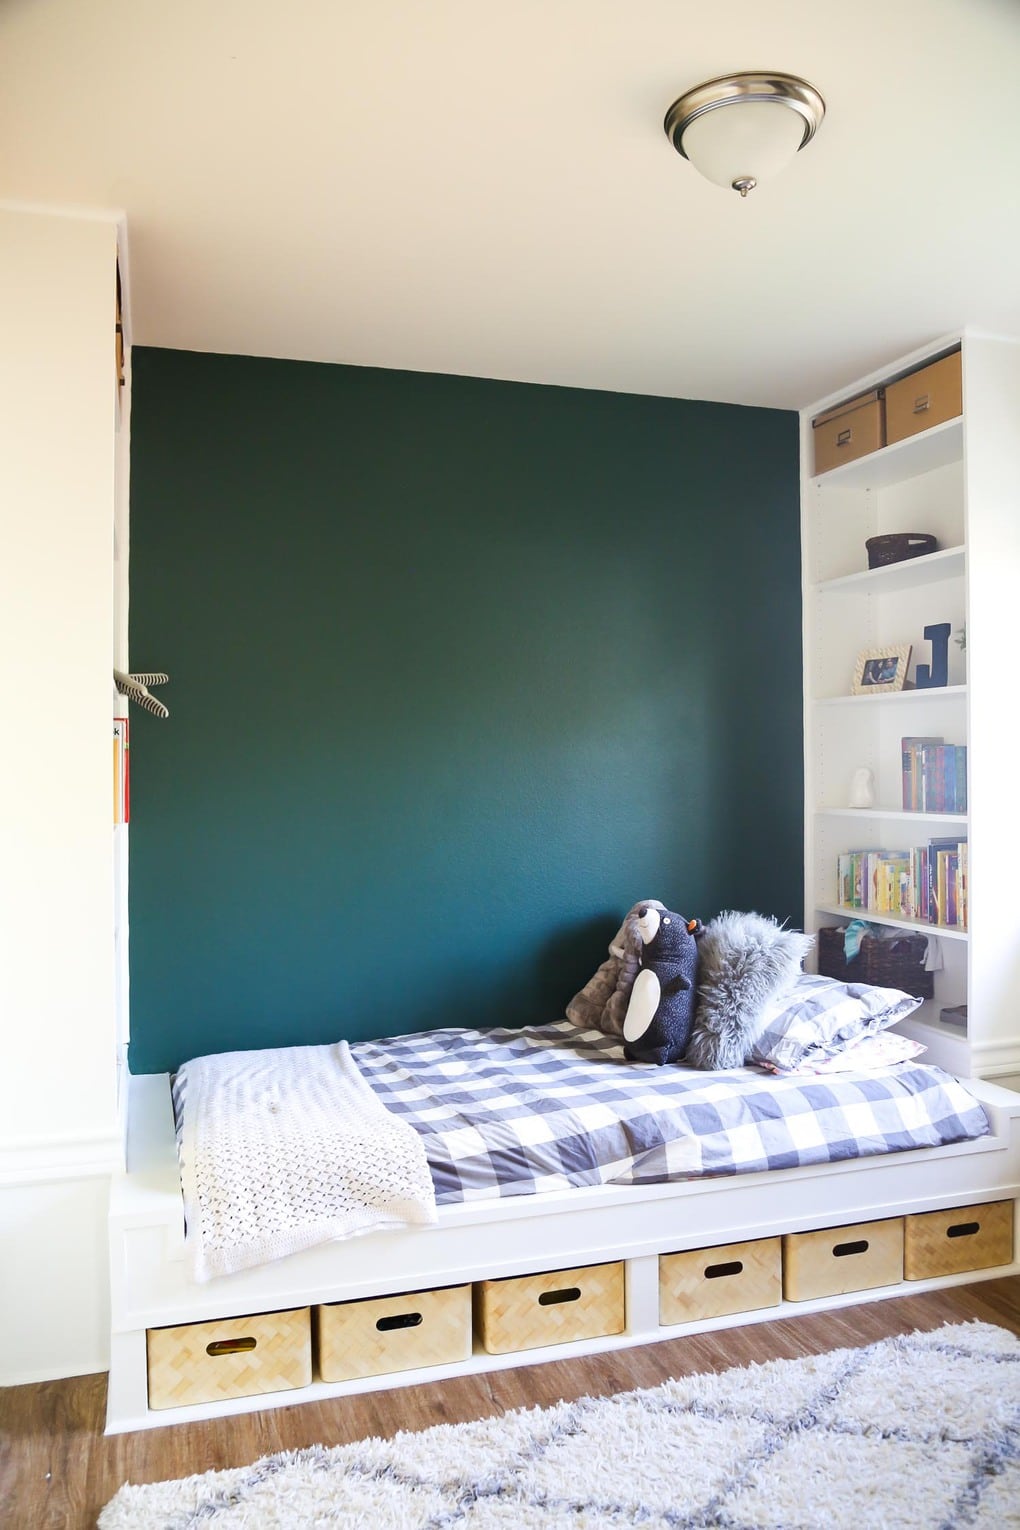 Platform bed with floor-to-ceiling bookcases and a green accent wall